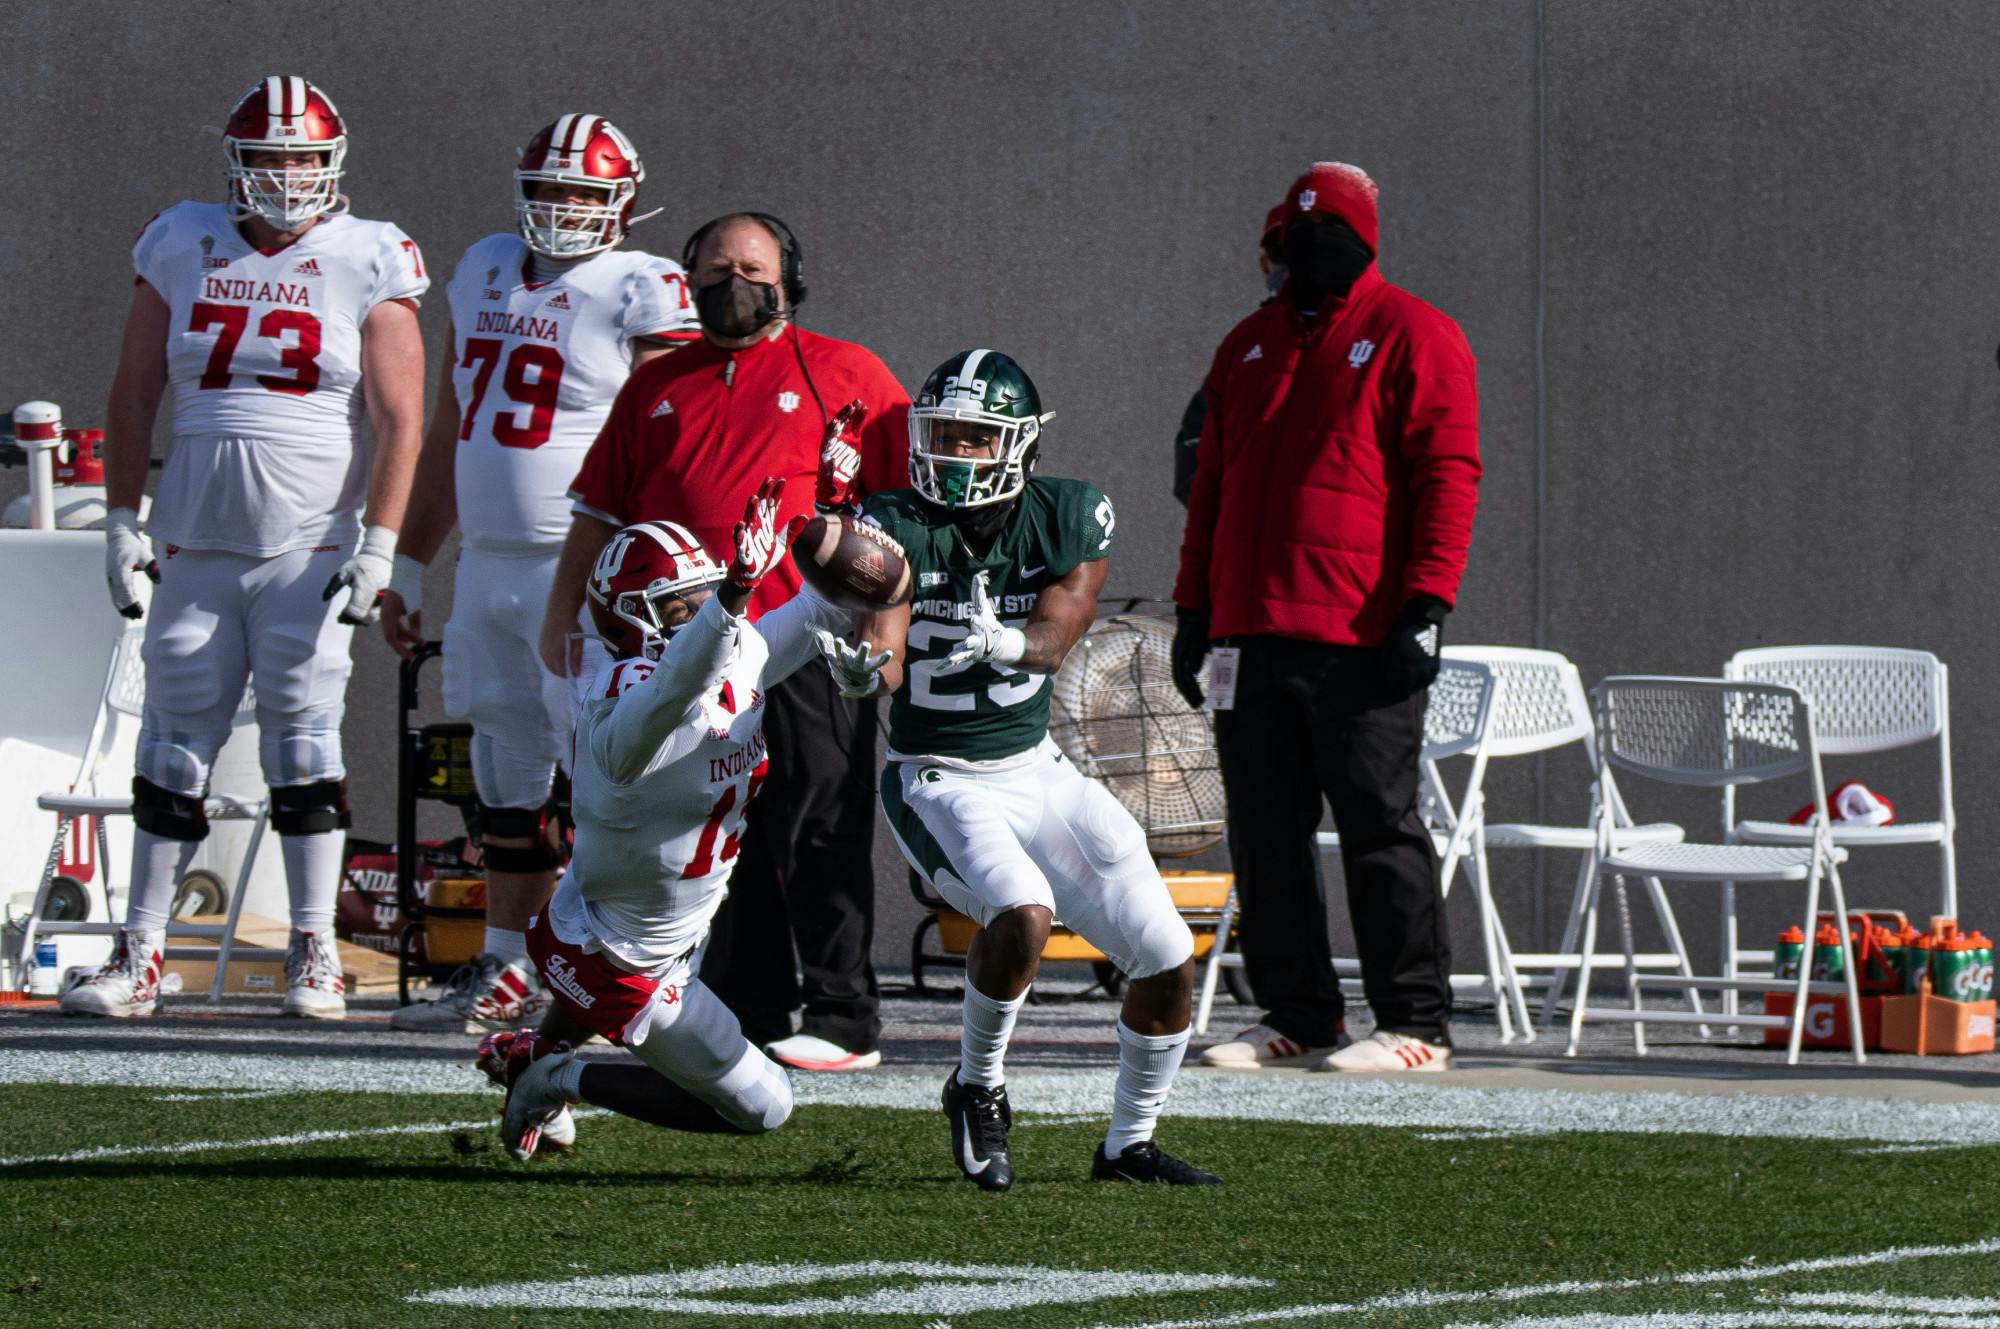 Cornerback, Shakur Brown (29) intercepts a Hoosier pass meant for Indiana wide reciever, Miles Marshal (13).